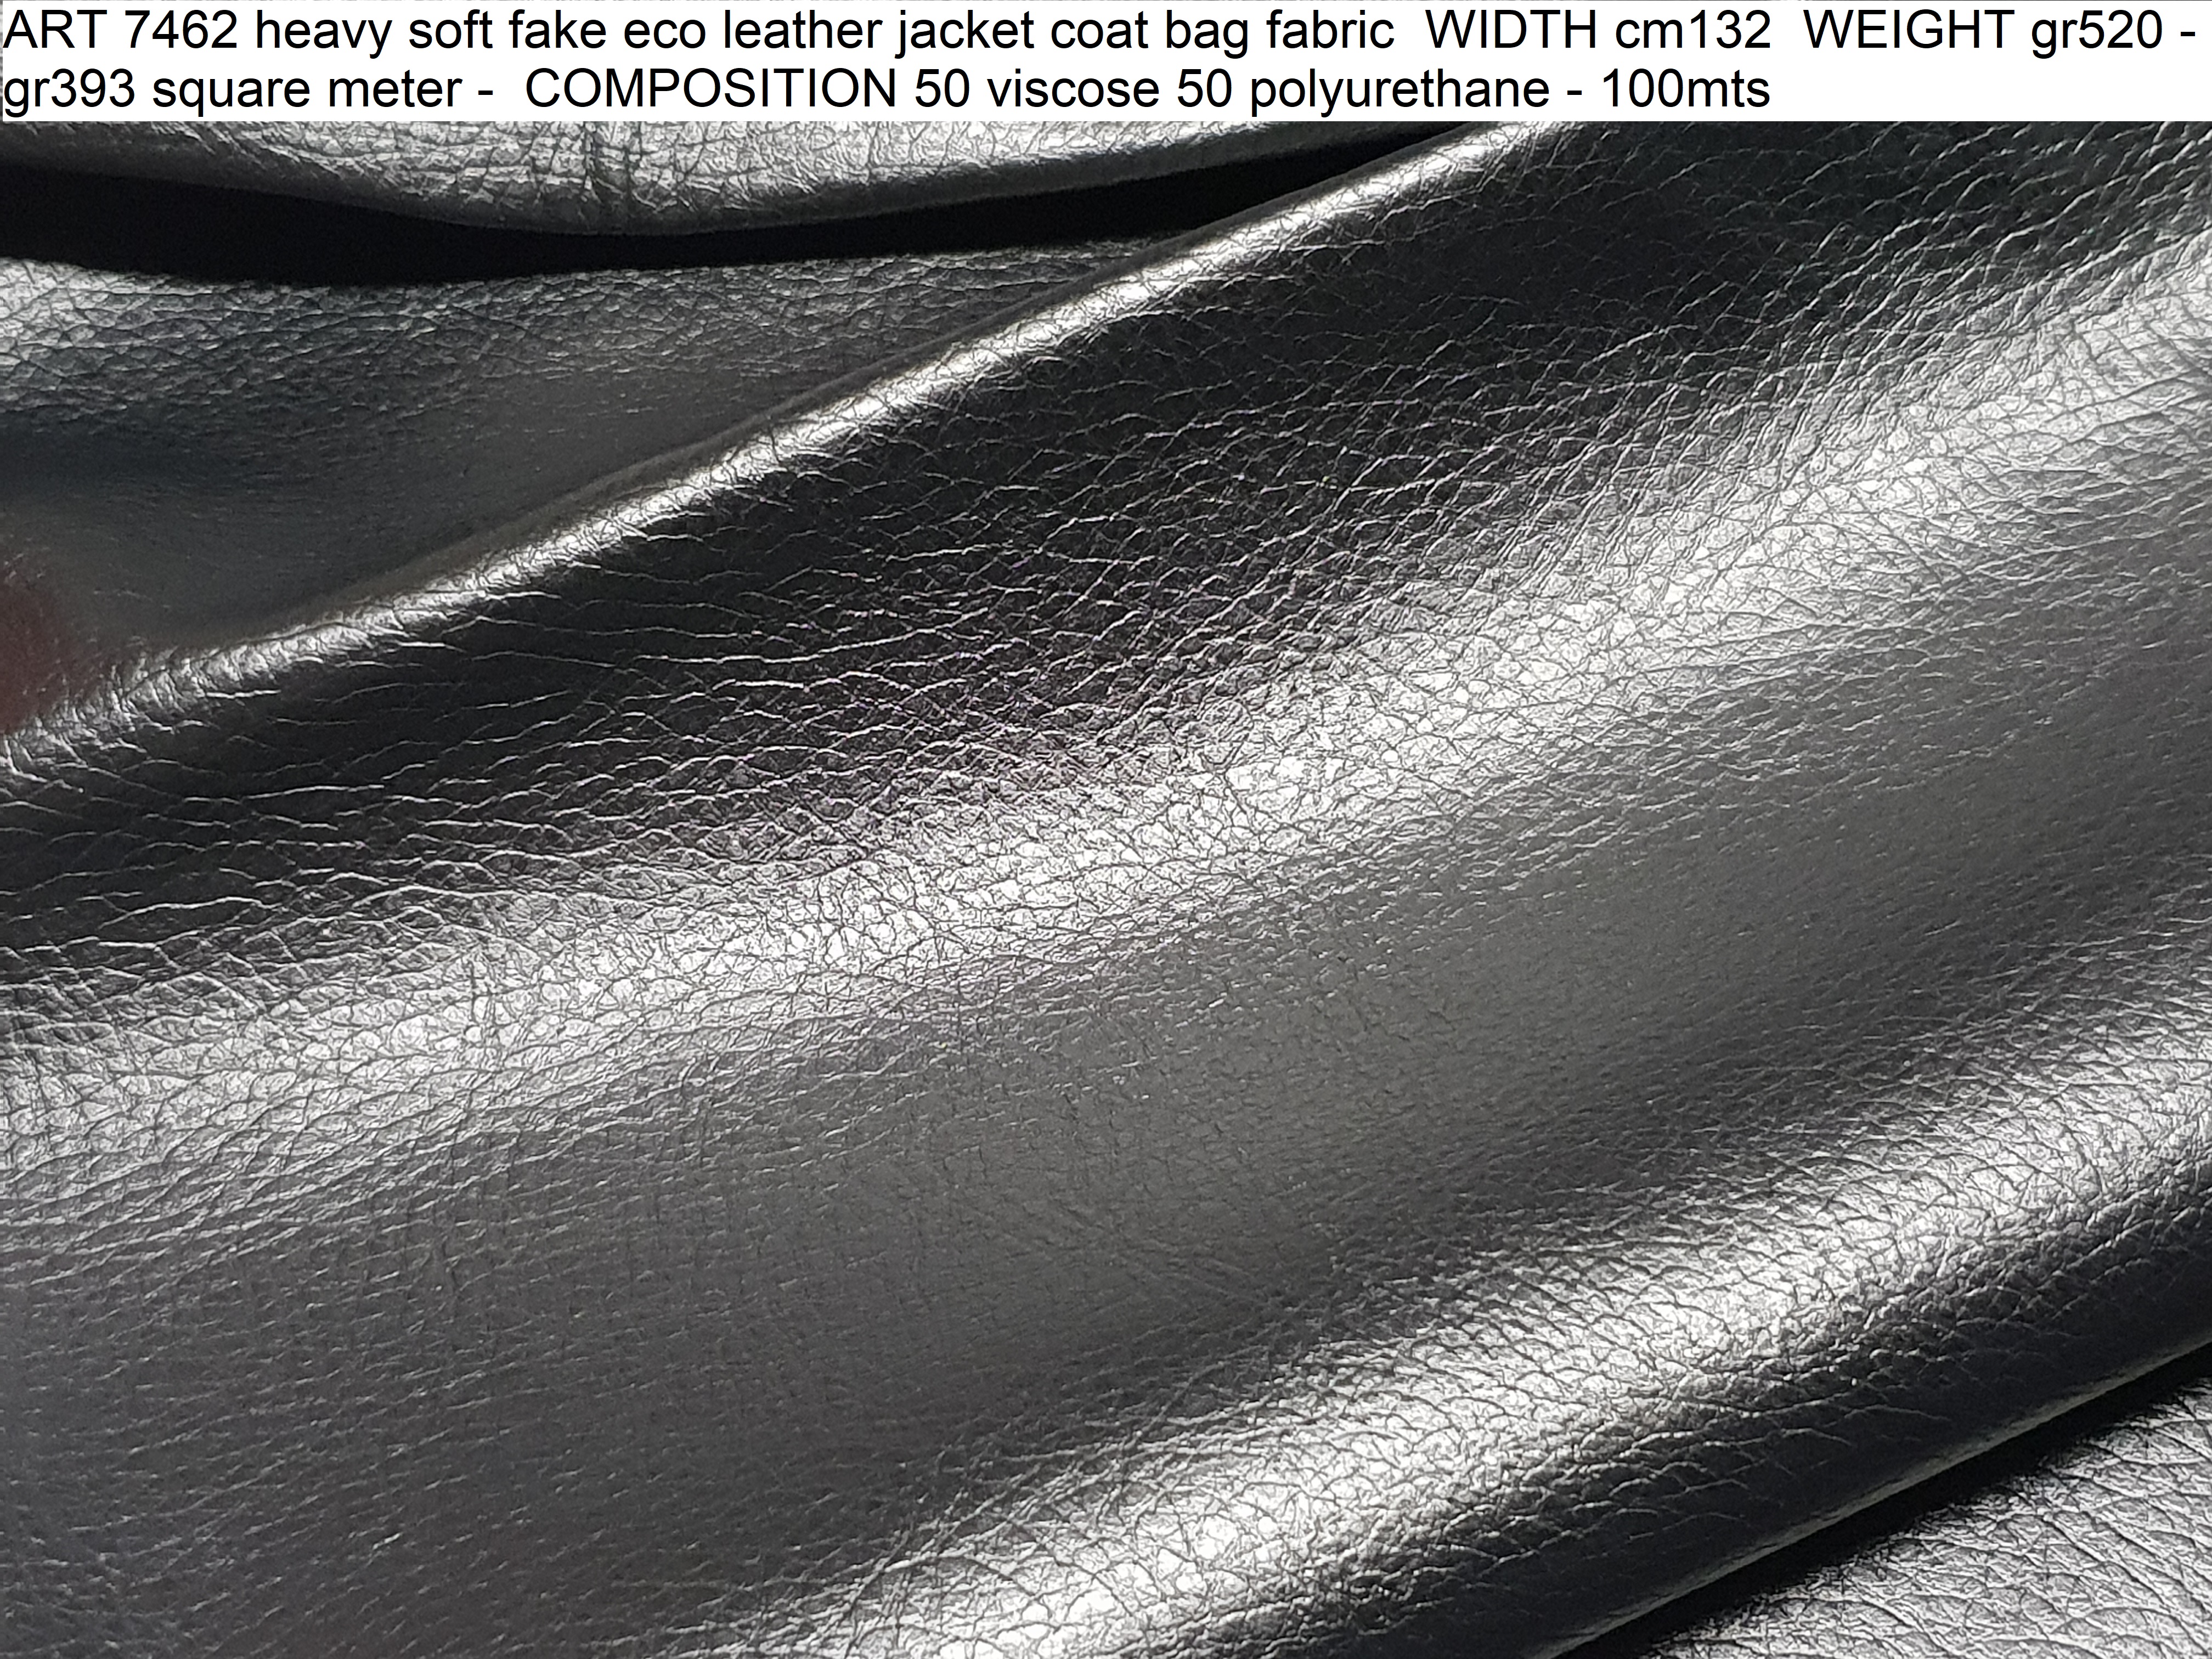 ART 7462 heavy soft fake eco leather jacket coat bag fabric WIDTH cm132 WEIGHT gr520 - gr393 square meter - COMPOSITION 50 viscose 50 polyurethane - 100mts